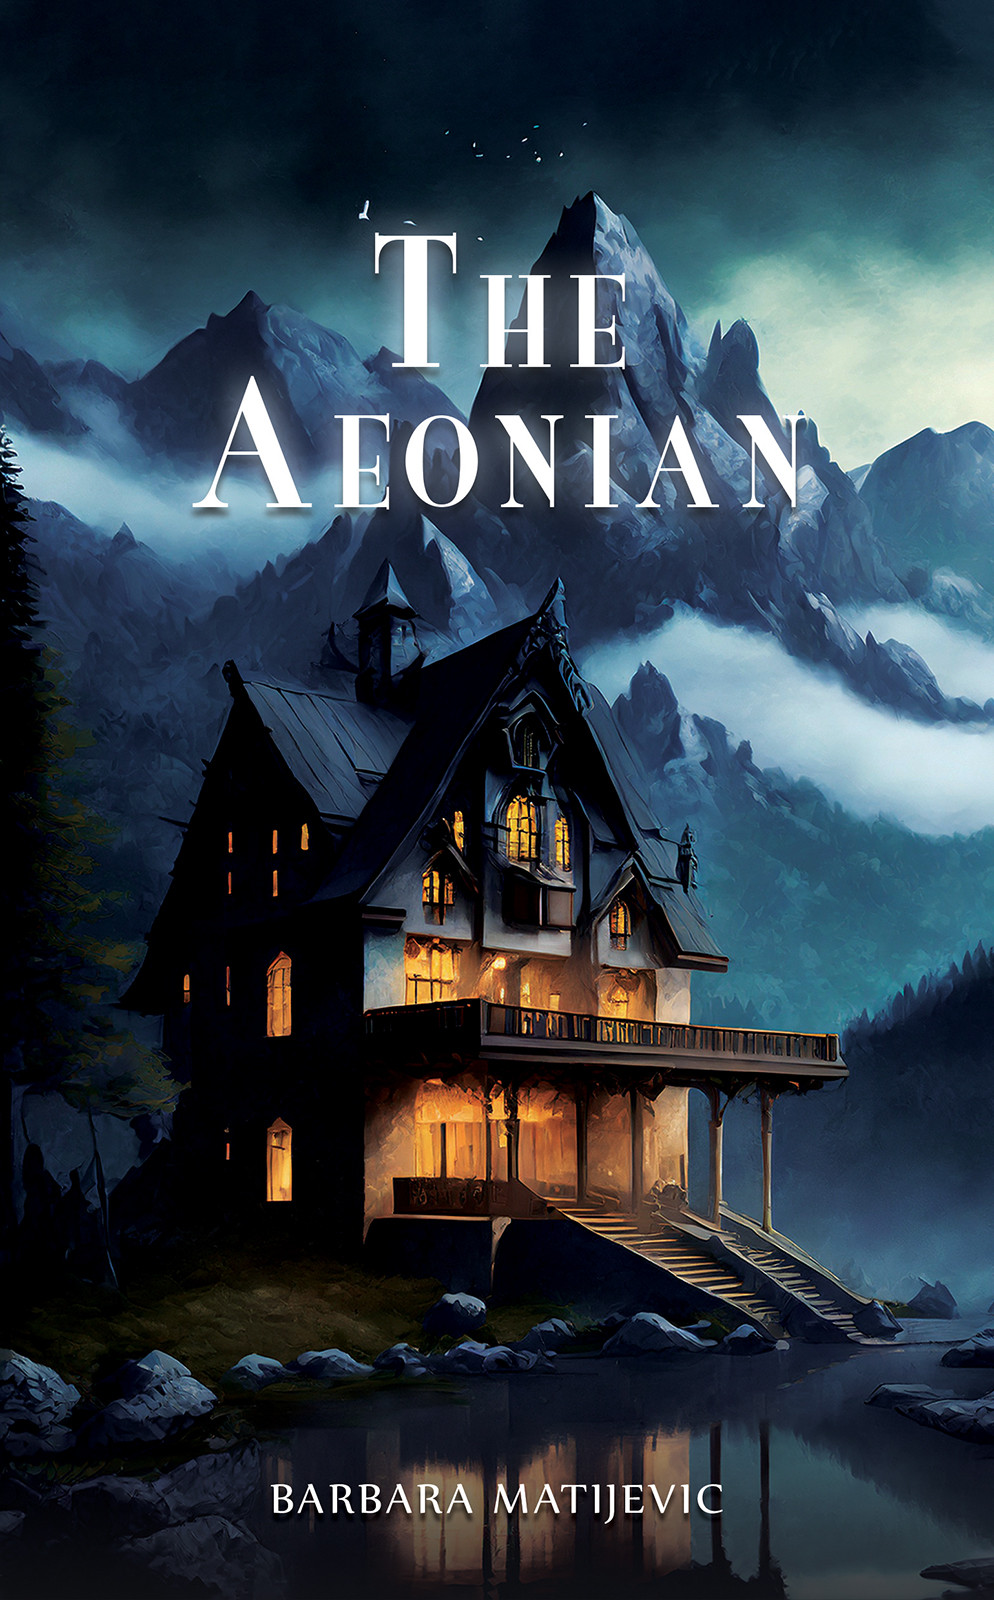 The Aeonian